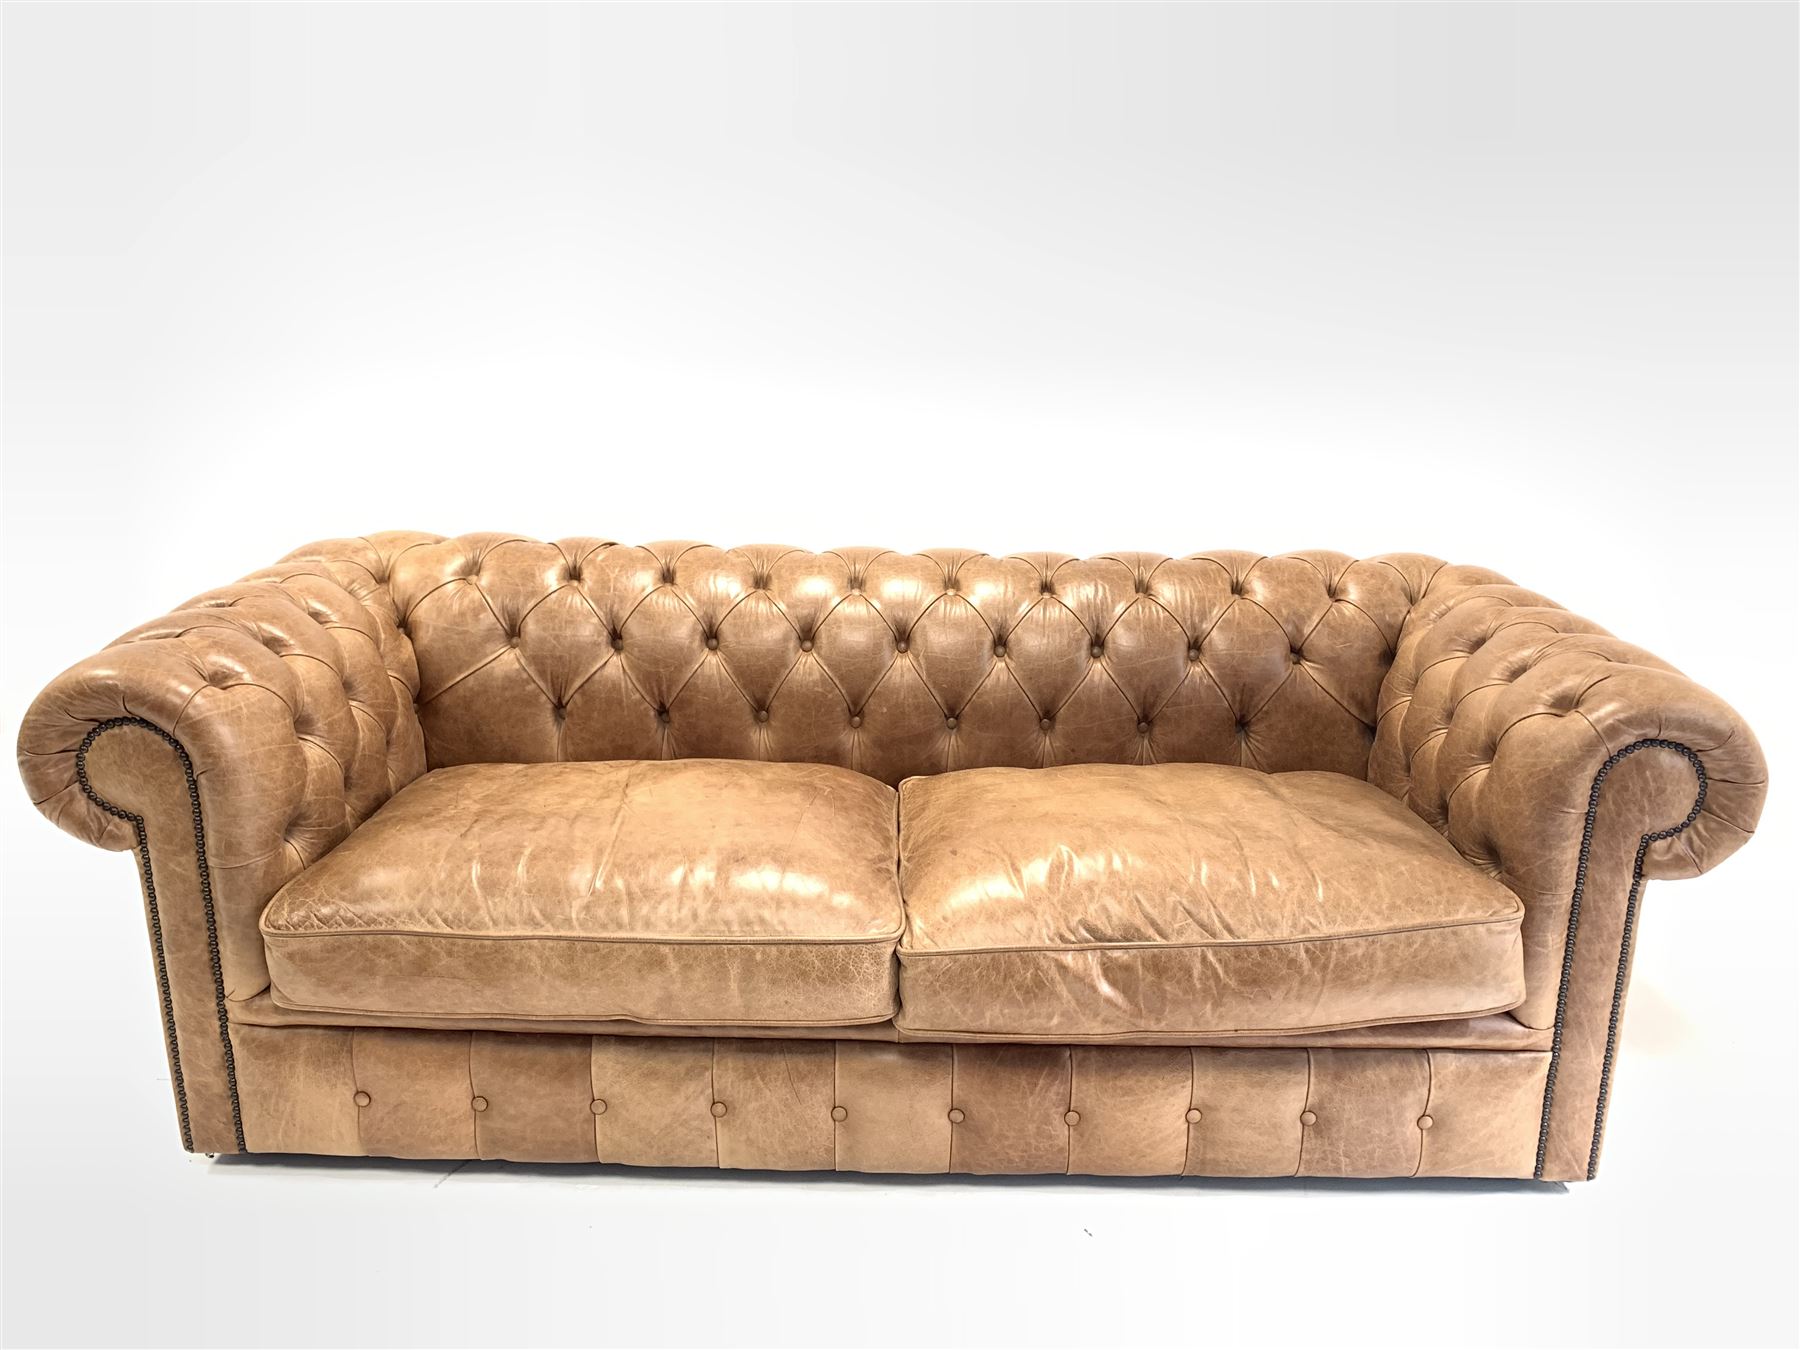 Chesterfield three seat sofa - Image 2 of 3